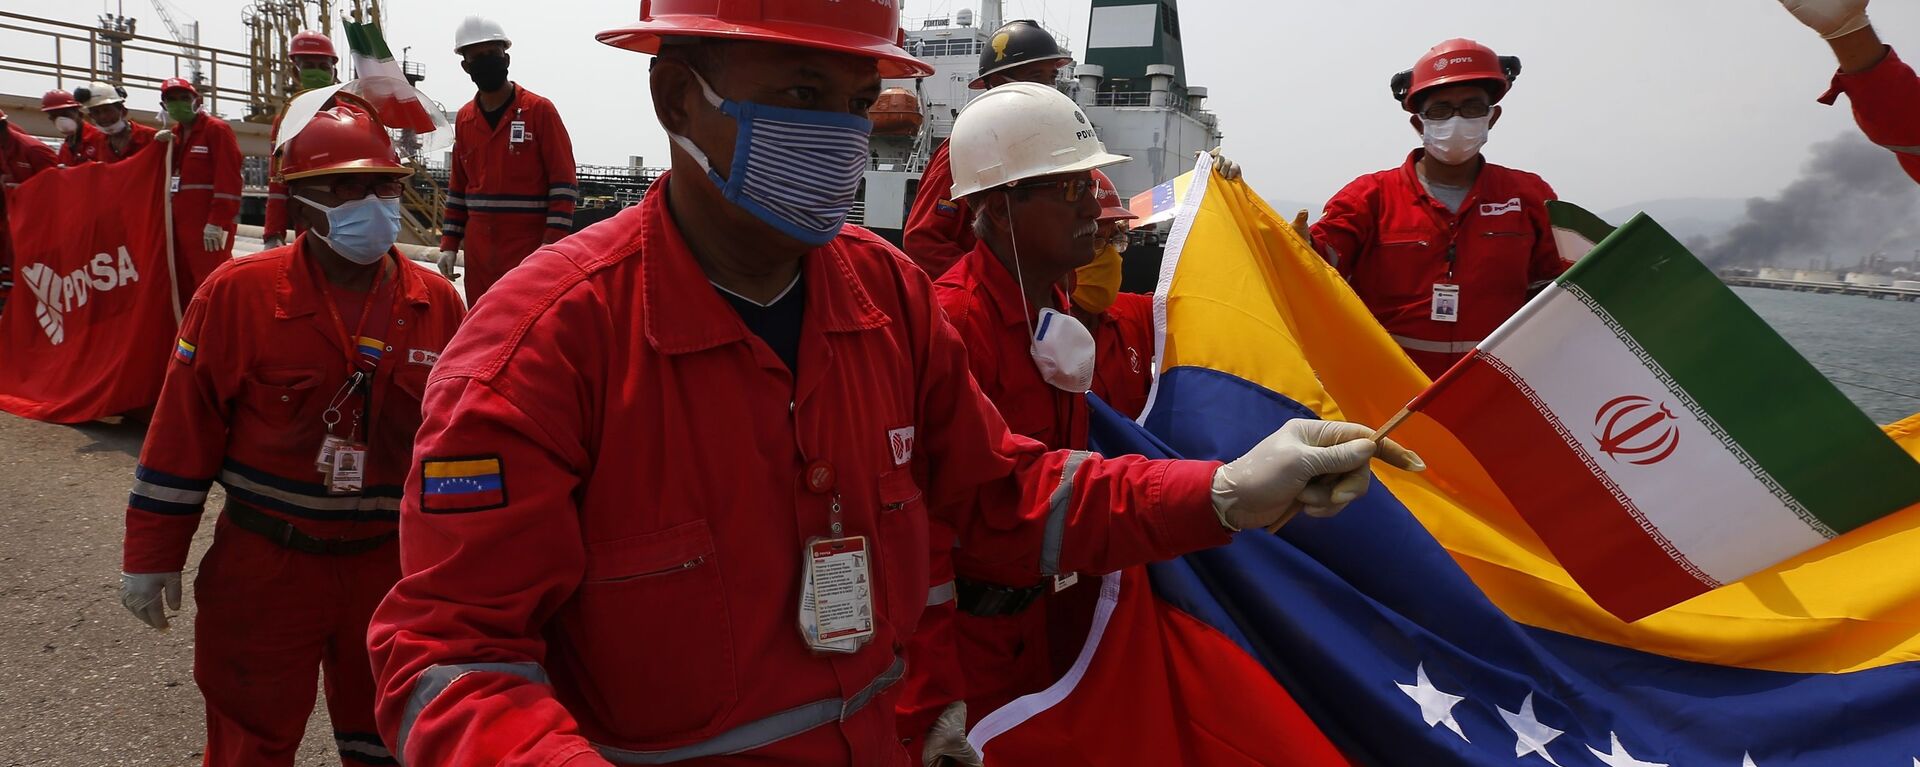 A Venezuelan oil worker holding a small Iranian flag attends a ceremony for the arrival of Iranian oil tanker Fortune at the El Palito refinery near Puerto Cabello, Venezuela, Monday, May 25, 2020 - Sputnik International, 1920, 24.06.2021